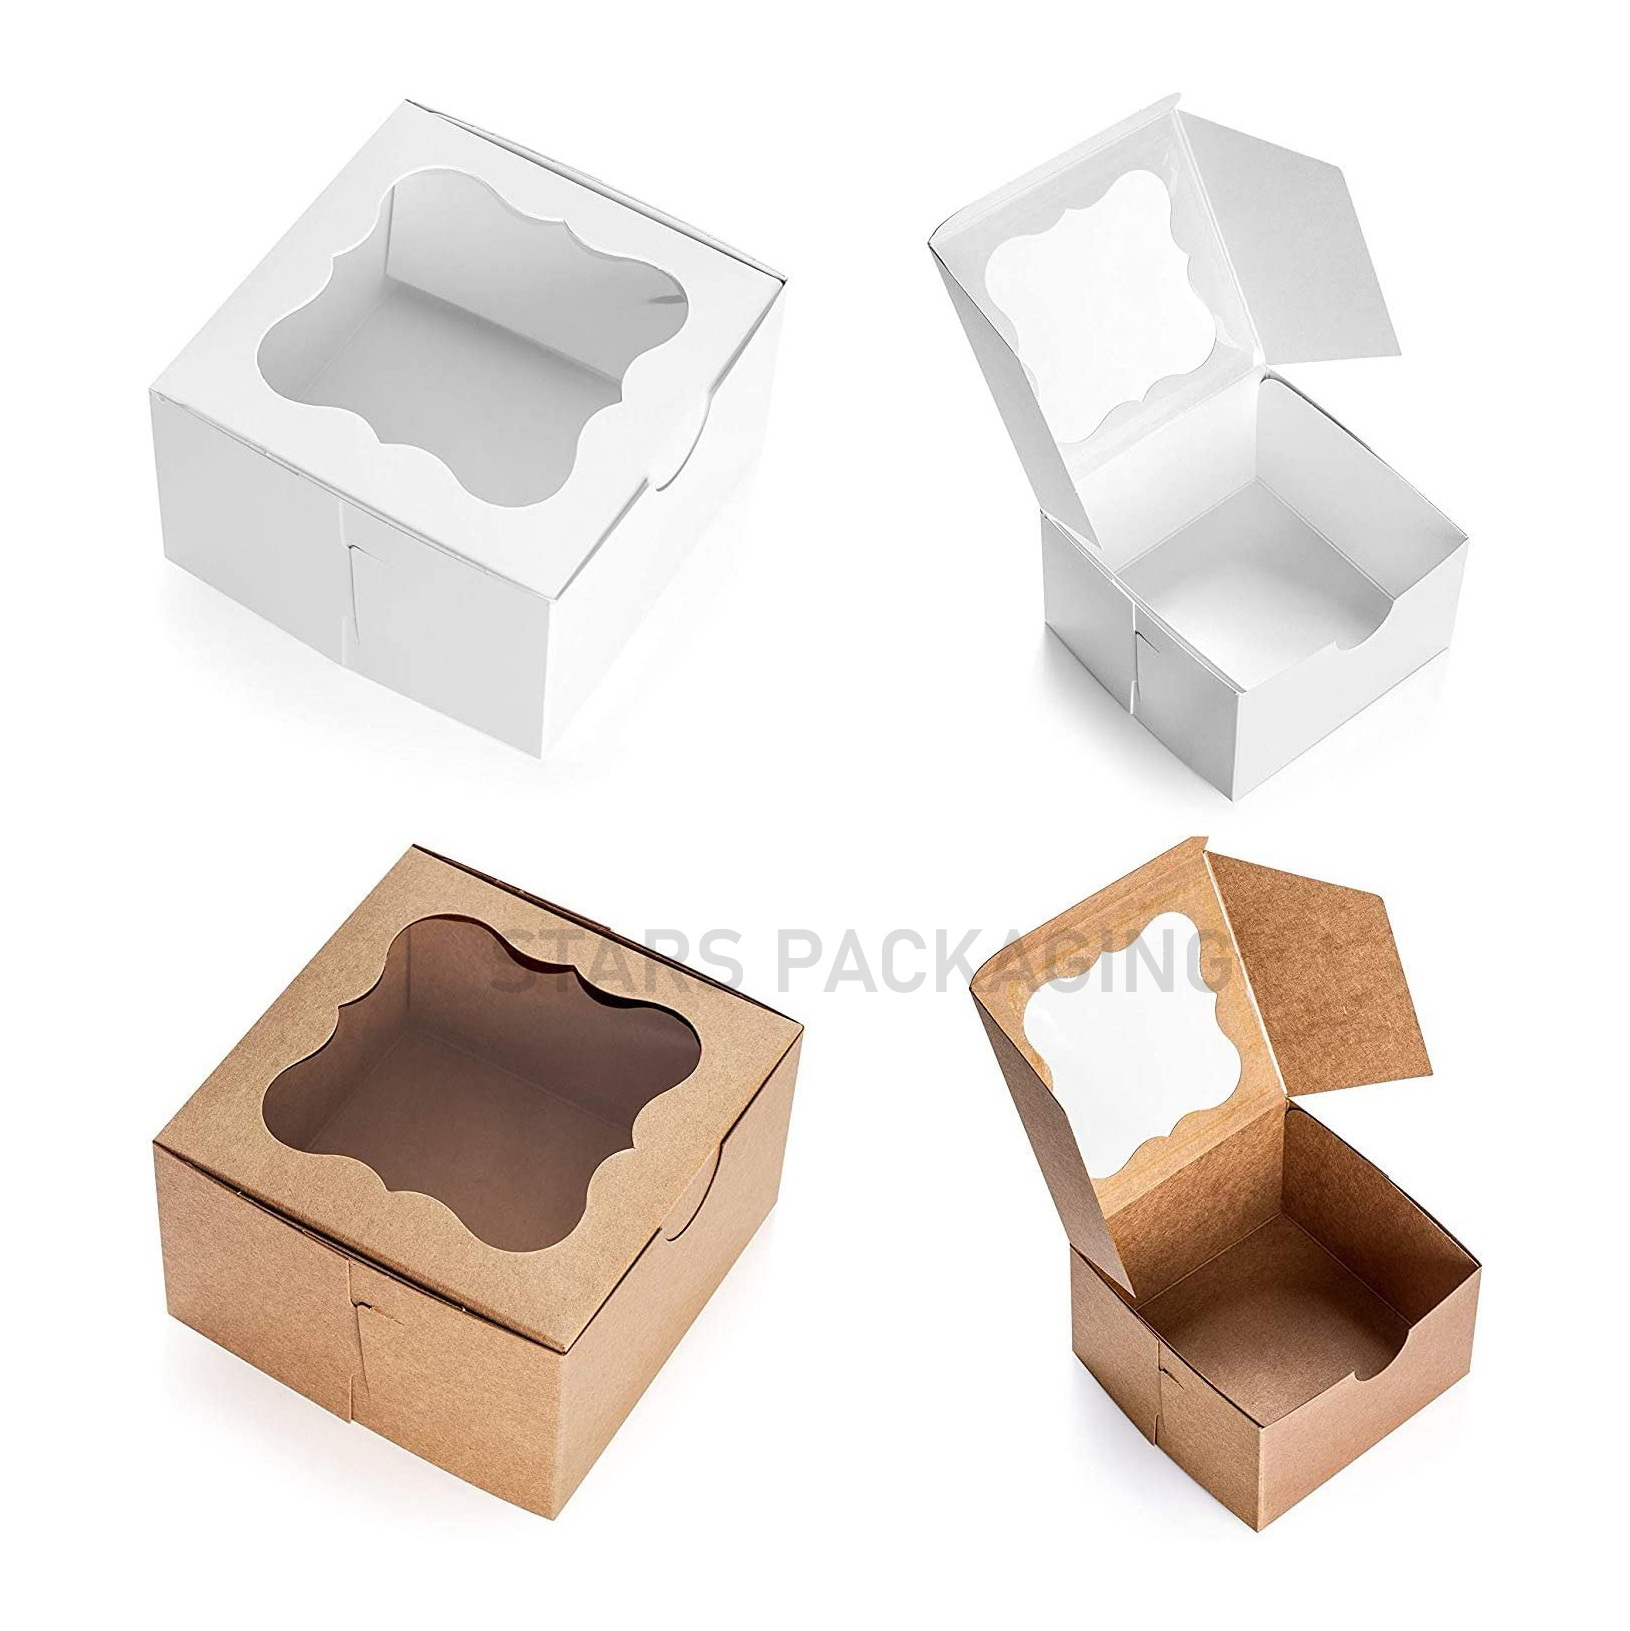 High-Quality Paper Box Advent Calendar Suppliers –  Custom Printed Bakery Packaging Pastry Boxes for Cookies, Cakes, Cupcakes, Donuts, Bread, Macarons  – Stars